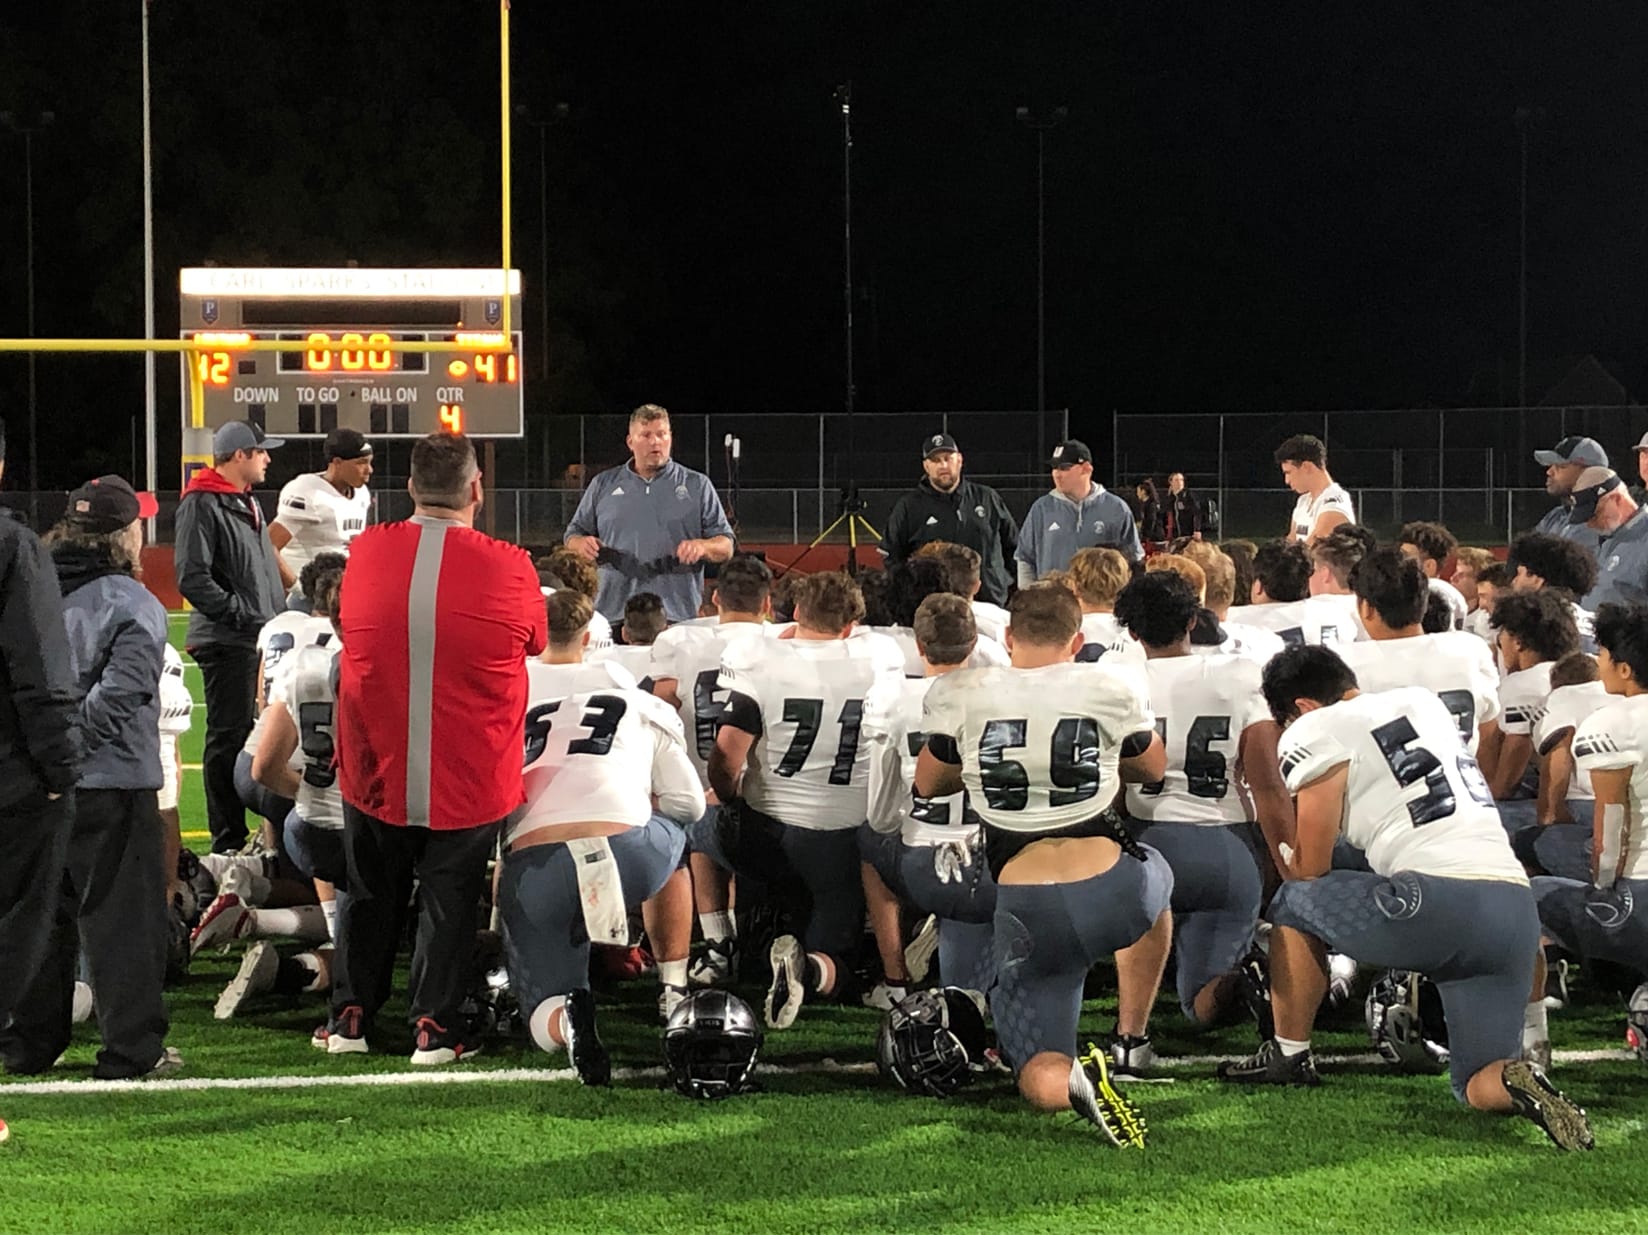 Union football coaches offer words of encouragement to player after a 42-41 loss to Puyallup on Saturday at Sparks Stadium in Puyallup (Micah Rice/The Columbian)